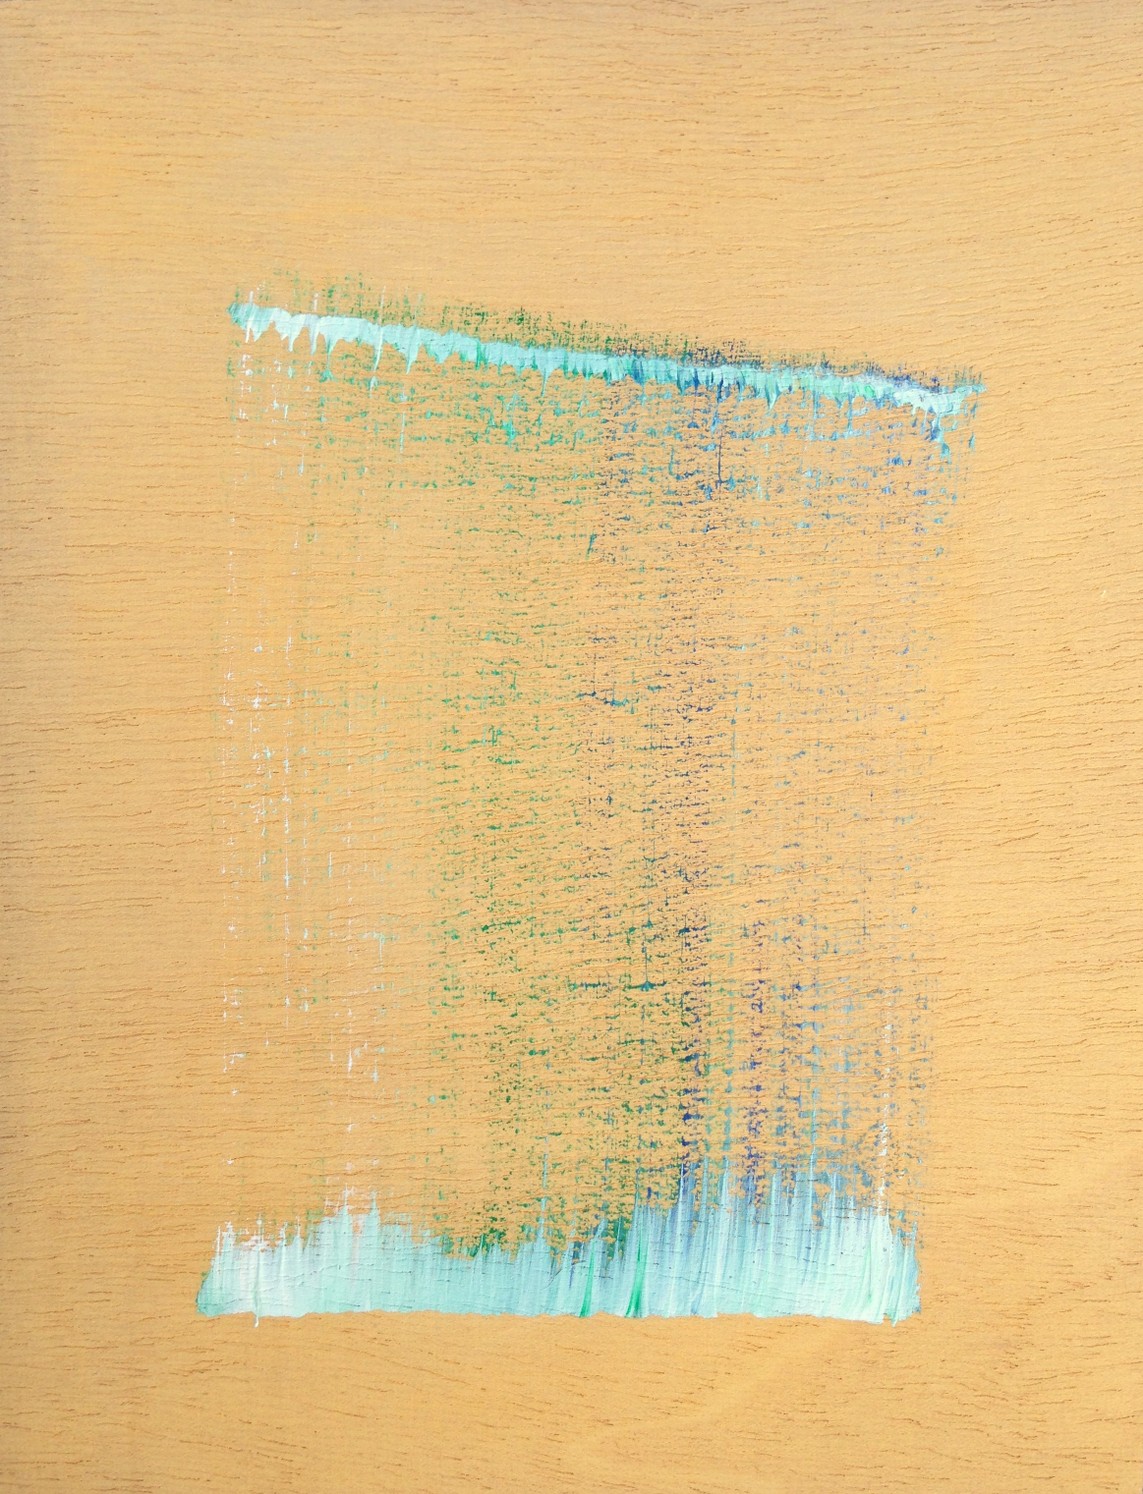 single stroke in white, blue and green 2 (back to where I never was), 2018